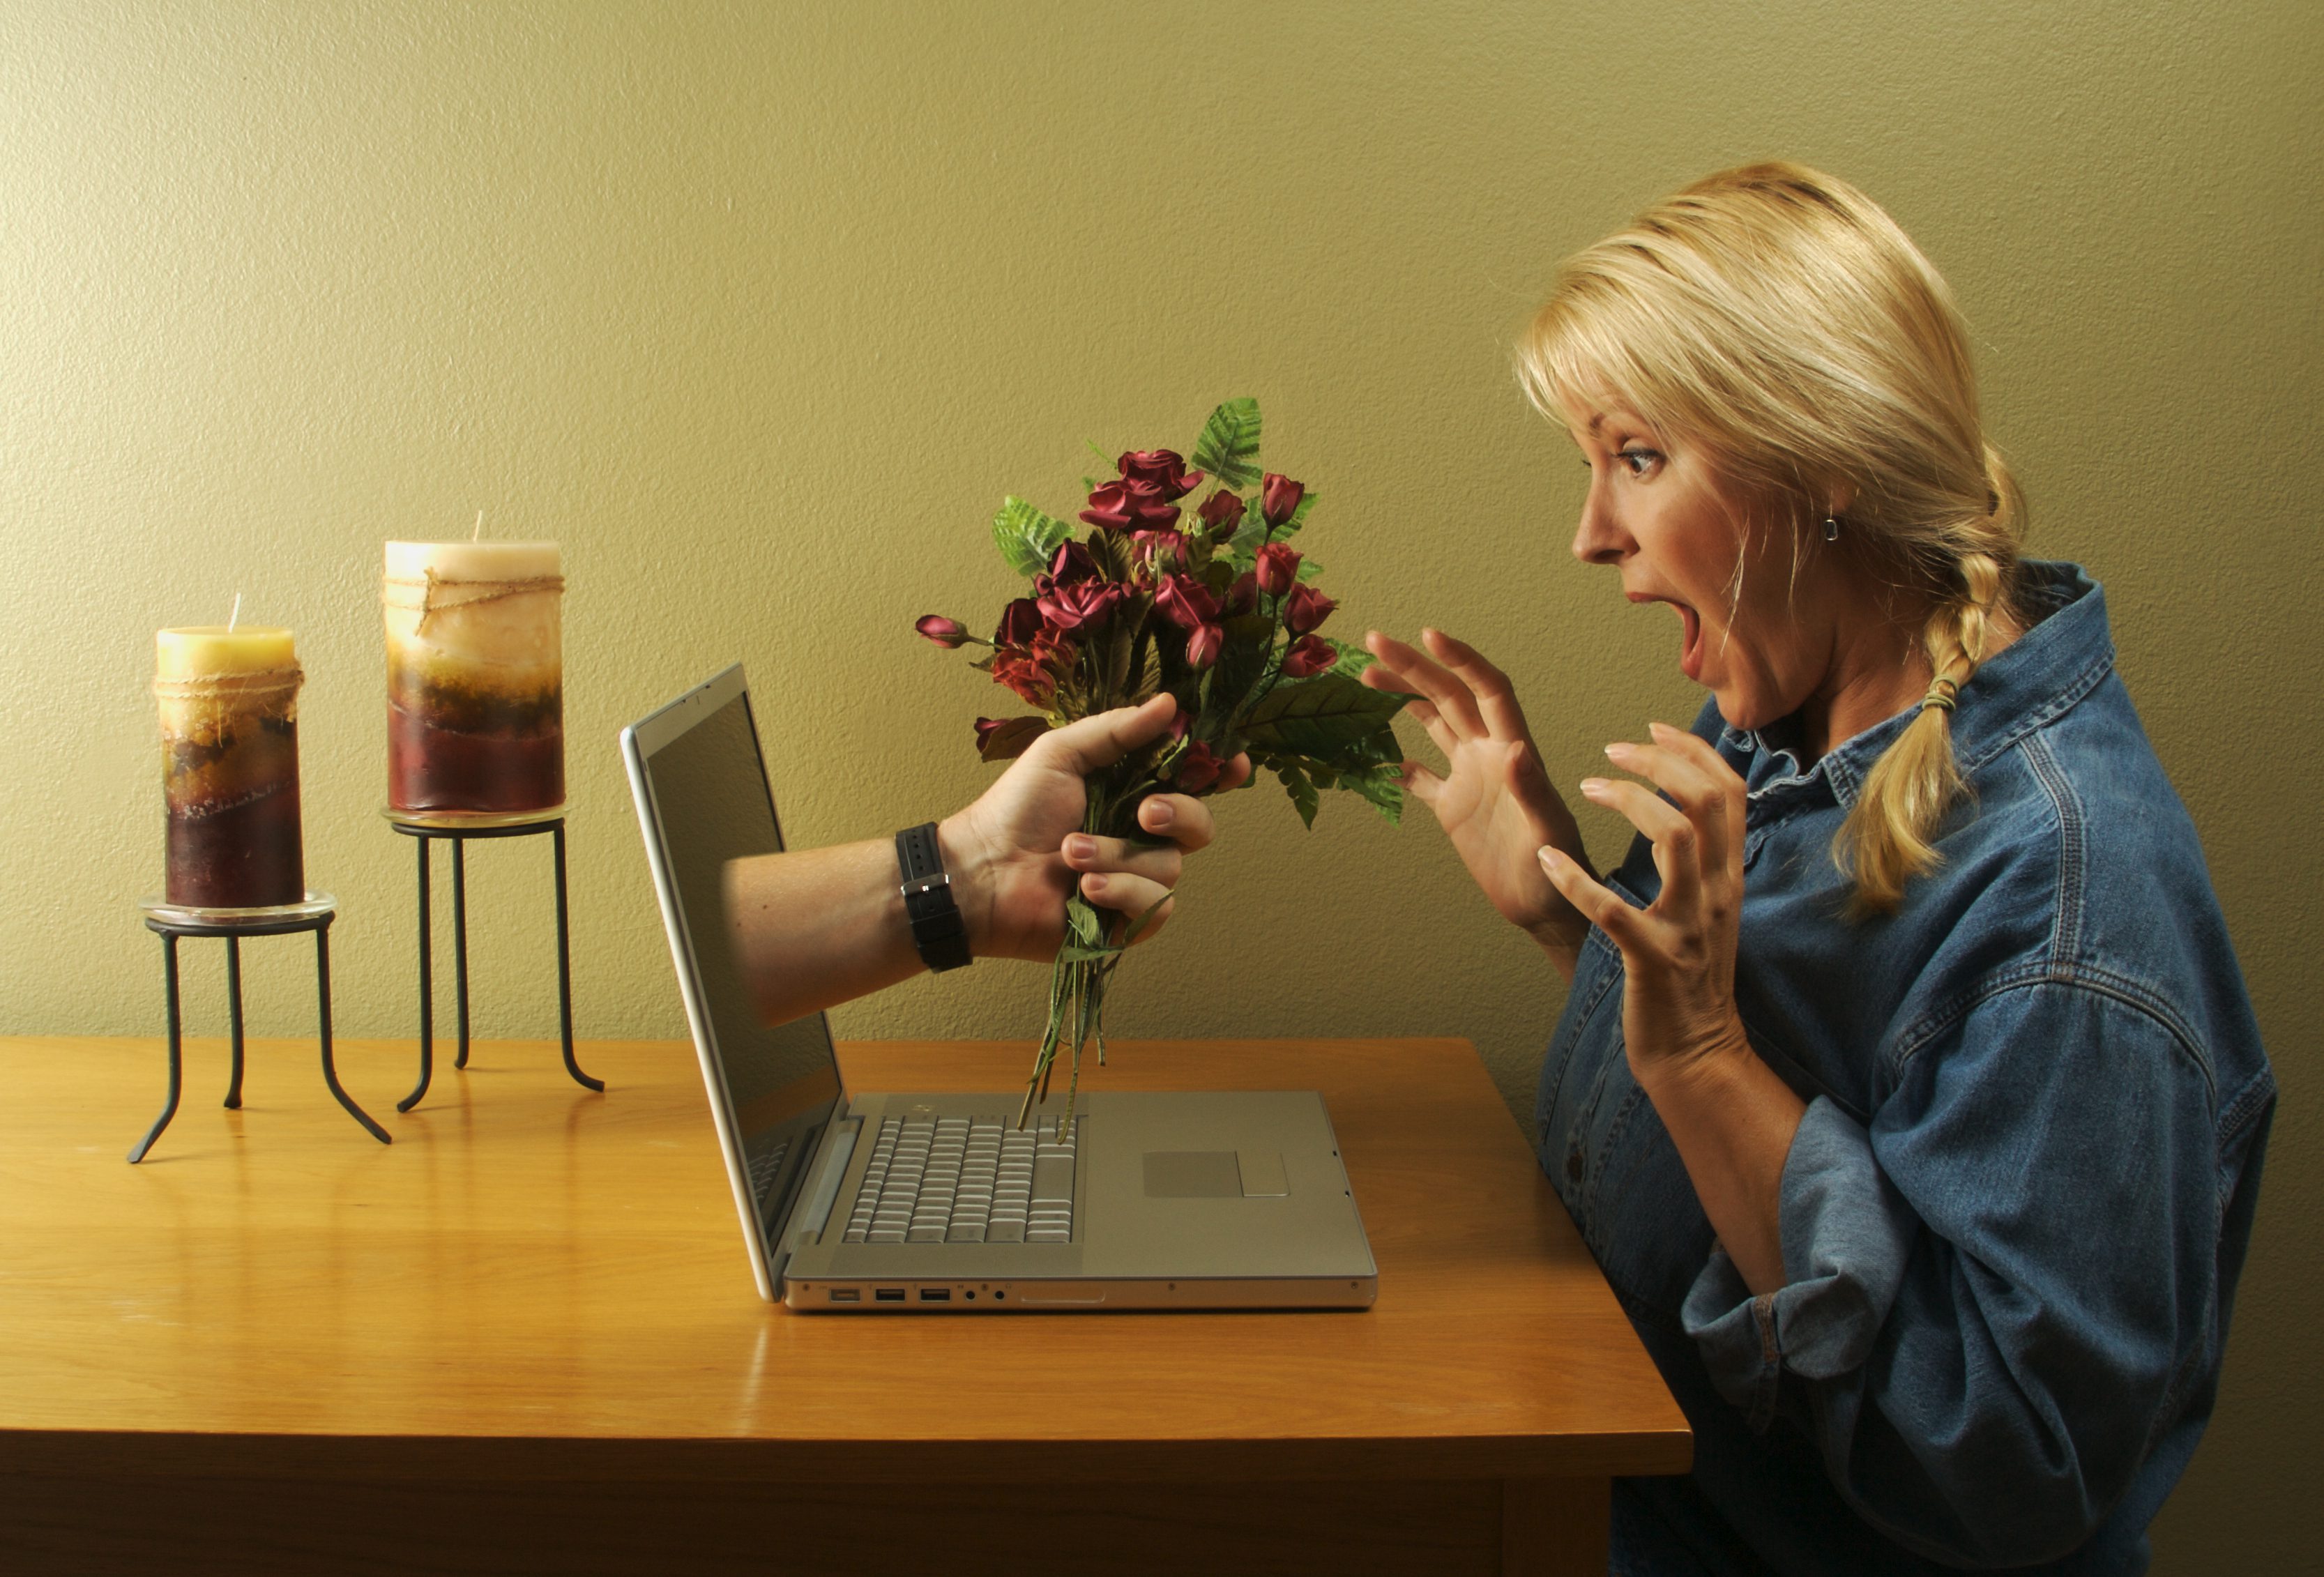 Online Dating: How To Tell If A Guy Is Serious Or Just Passing Time?